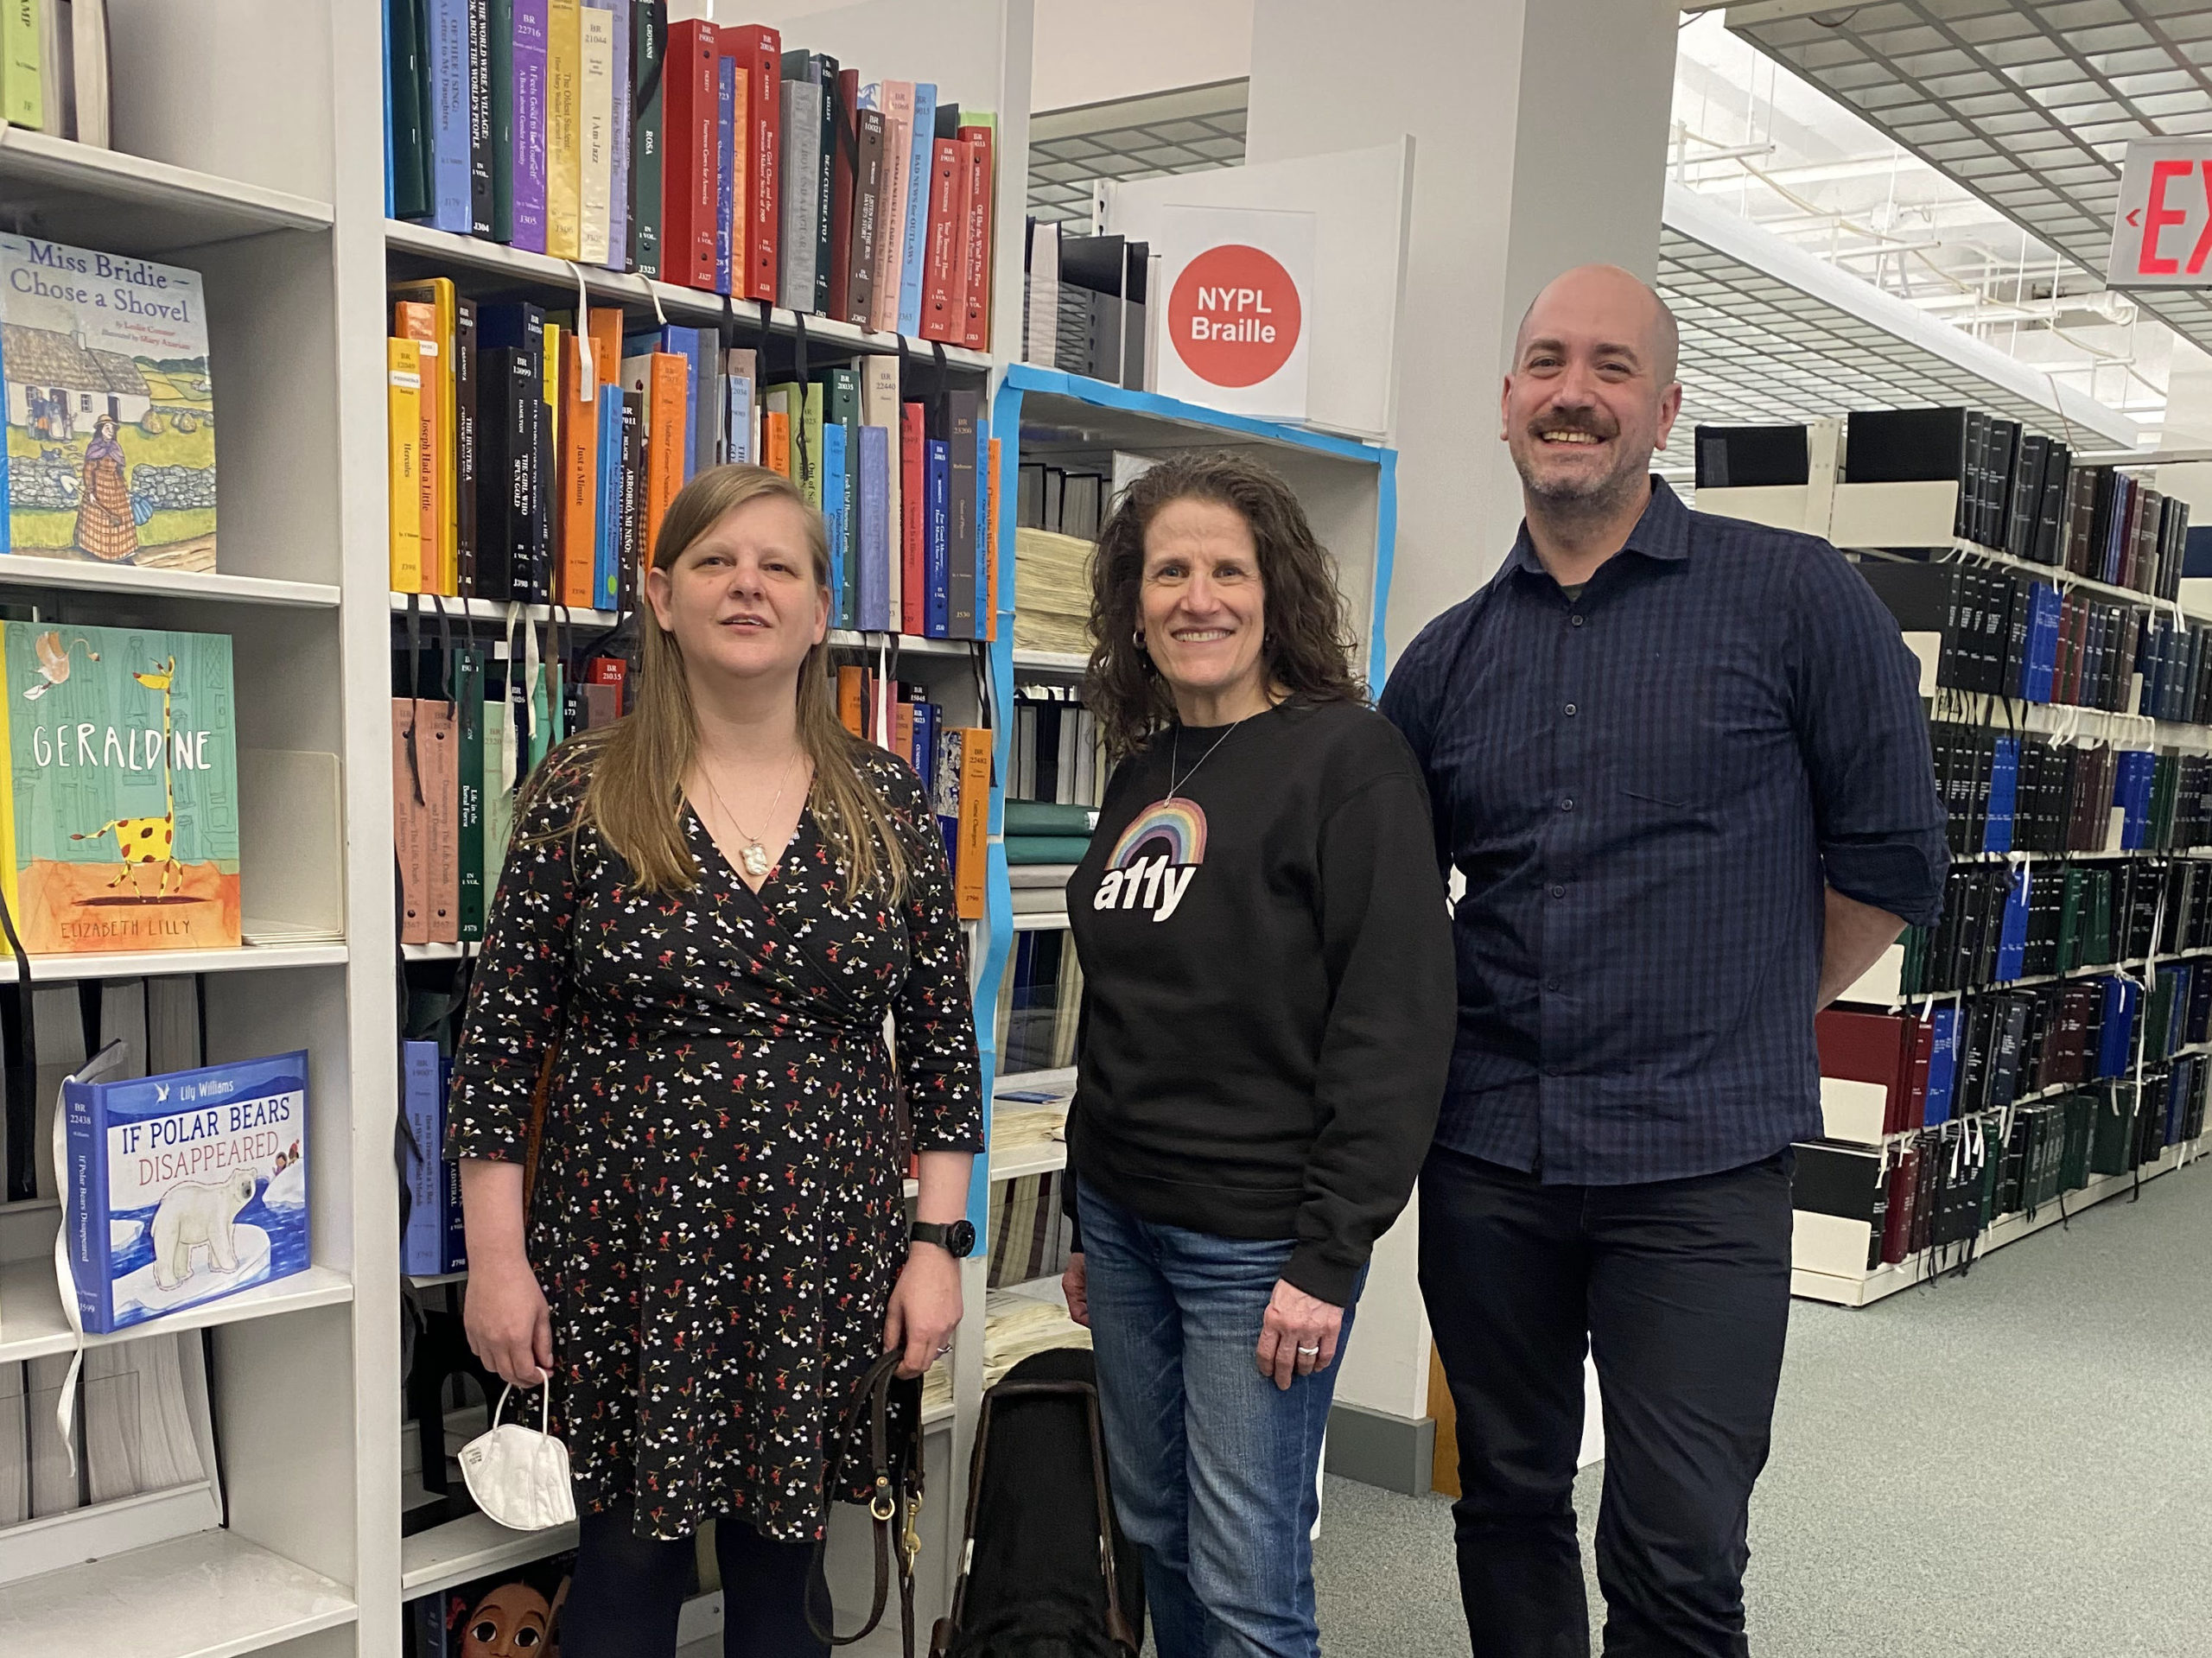 Chancey Fleet, Meryl Evans, and Thomas Logan stand in front of book stacks with Braille books